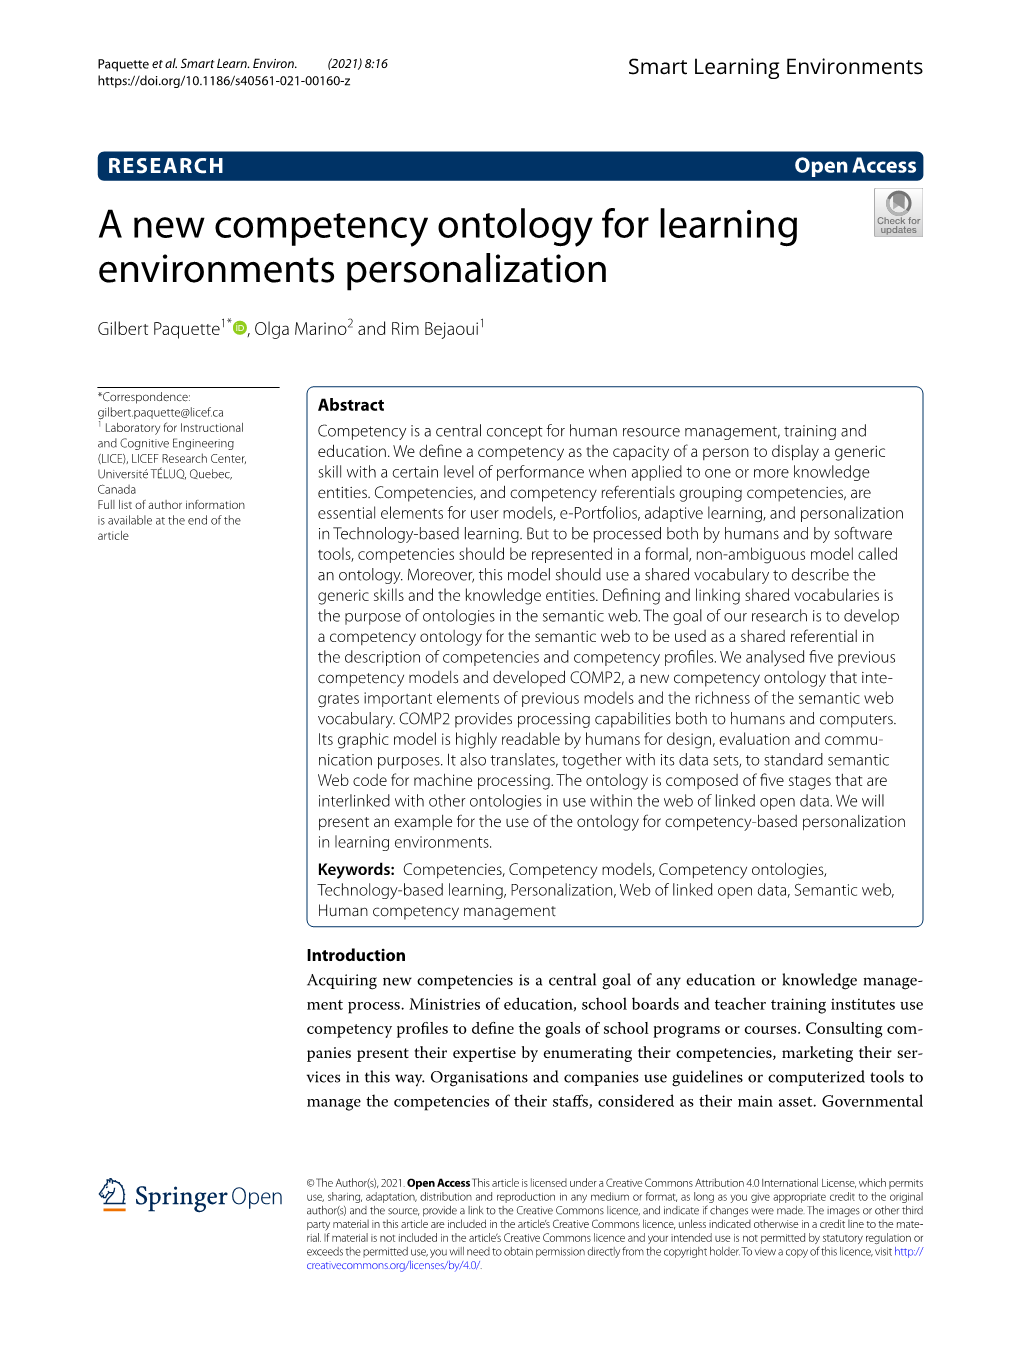 A New Competency Ontology for Learning Environments Personalization